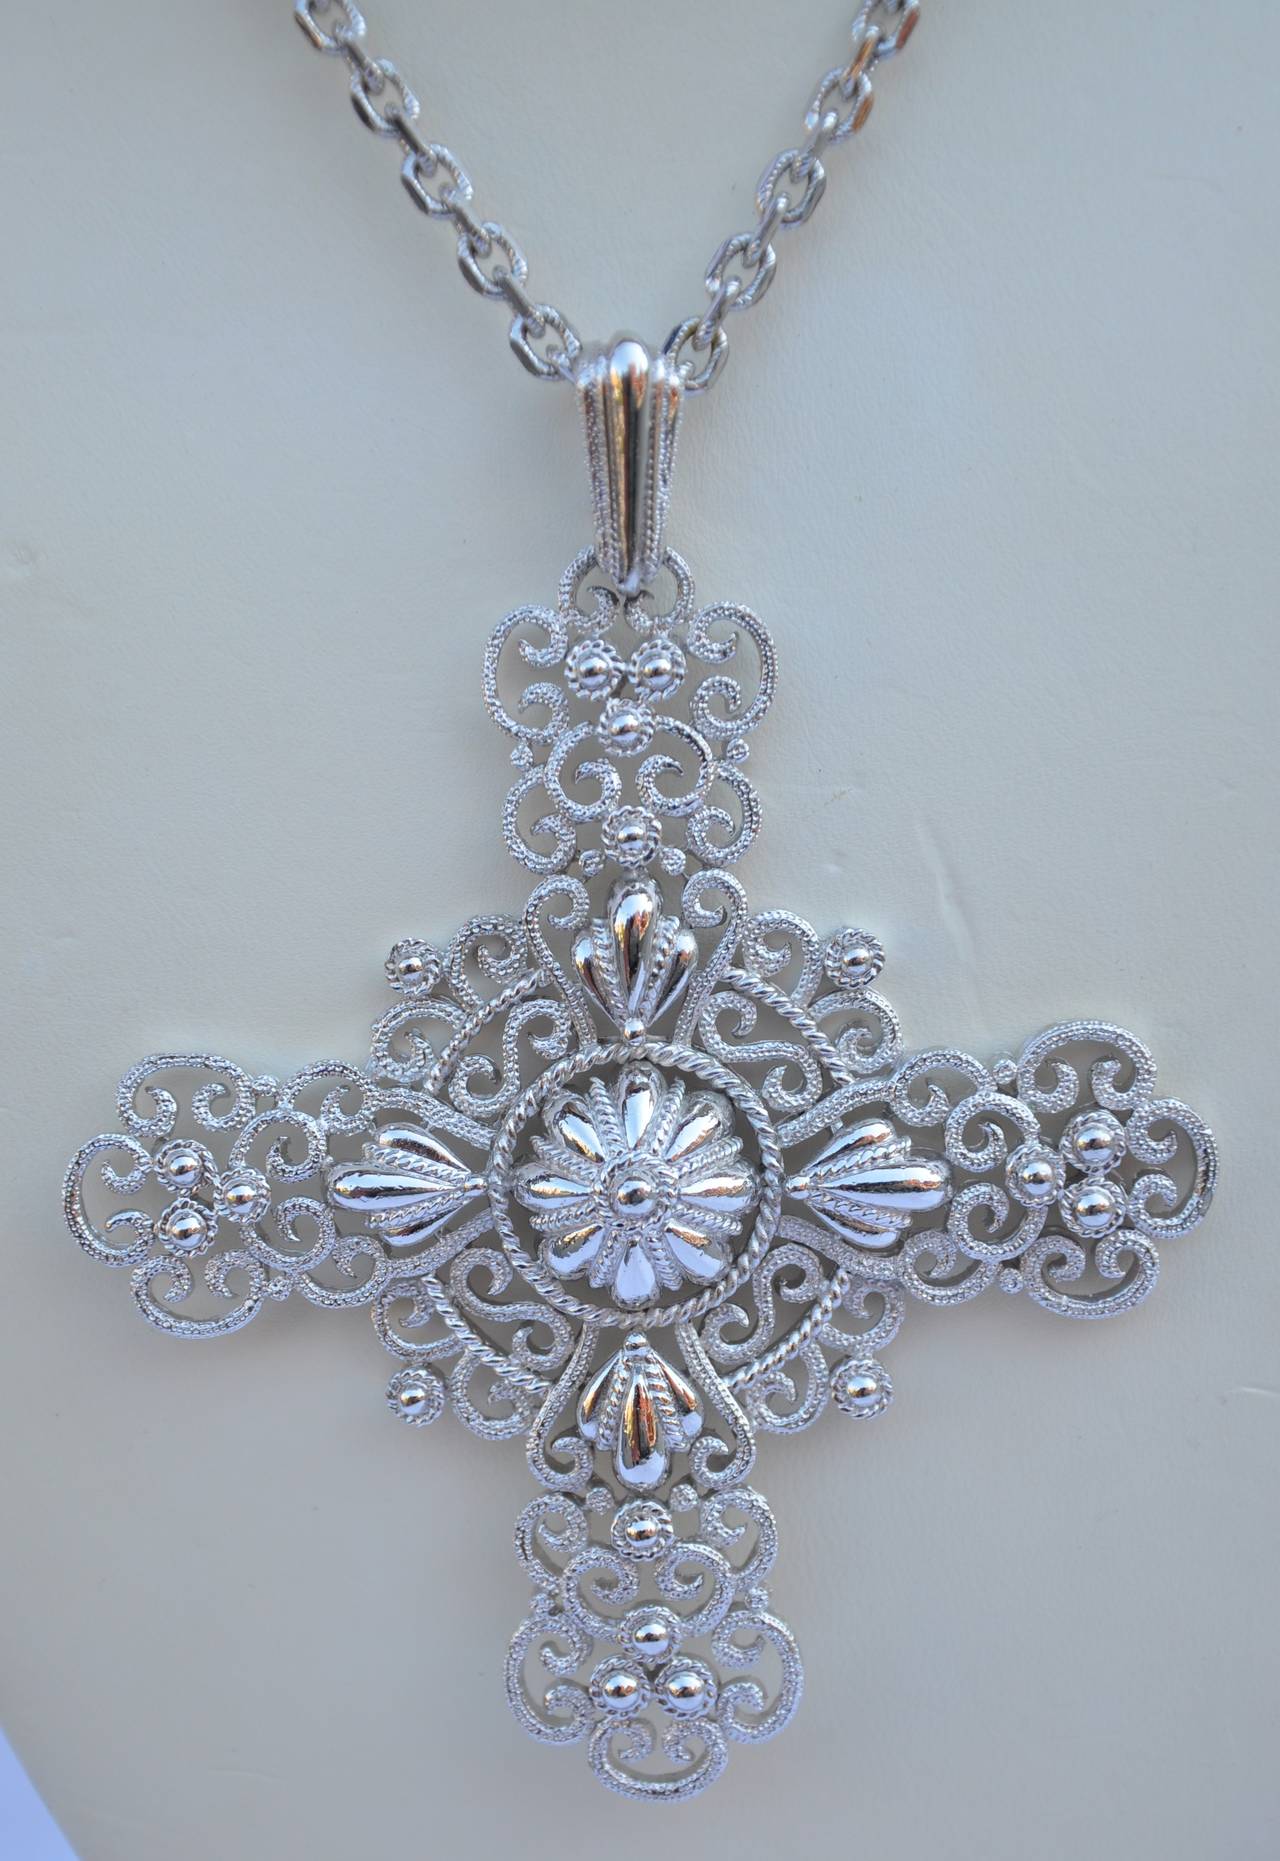 Trifari wonderfully detailed gild silver with filigree on both Pendant and necklace. The pendant itself measures 4 1/2" in length, width is 3 1/2", and depth is 3/8". The necklace measures 28" in length. Pendant is signed on the